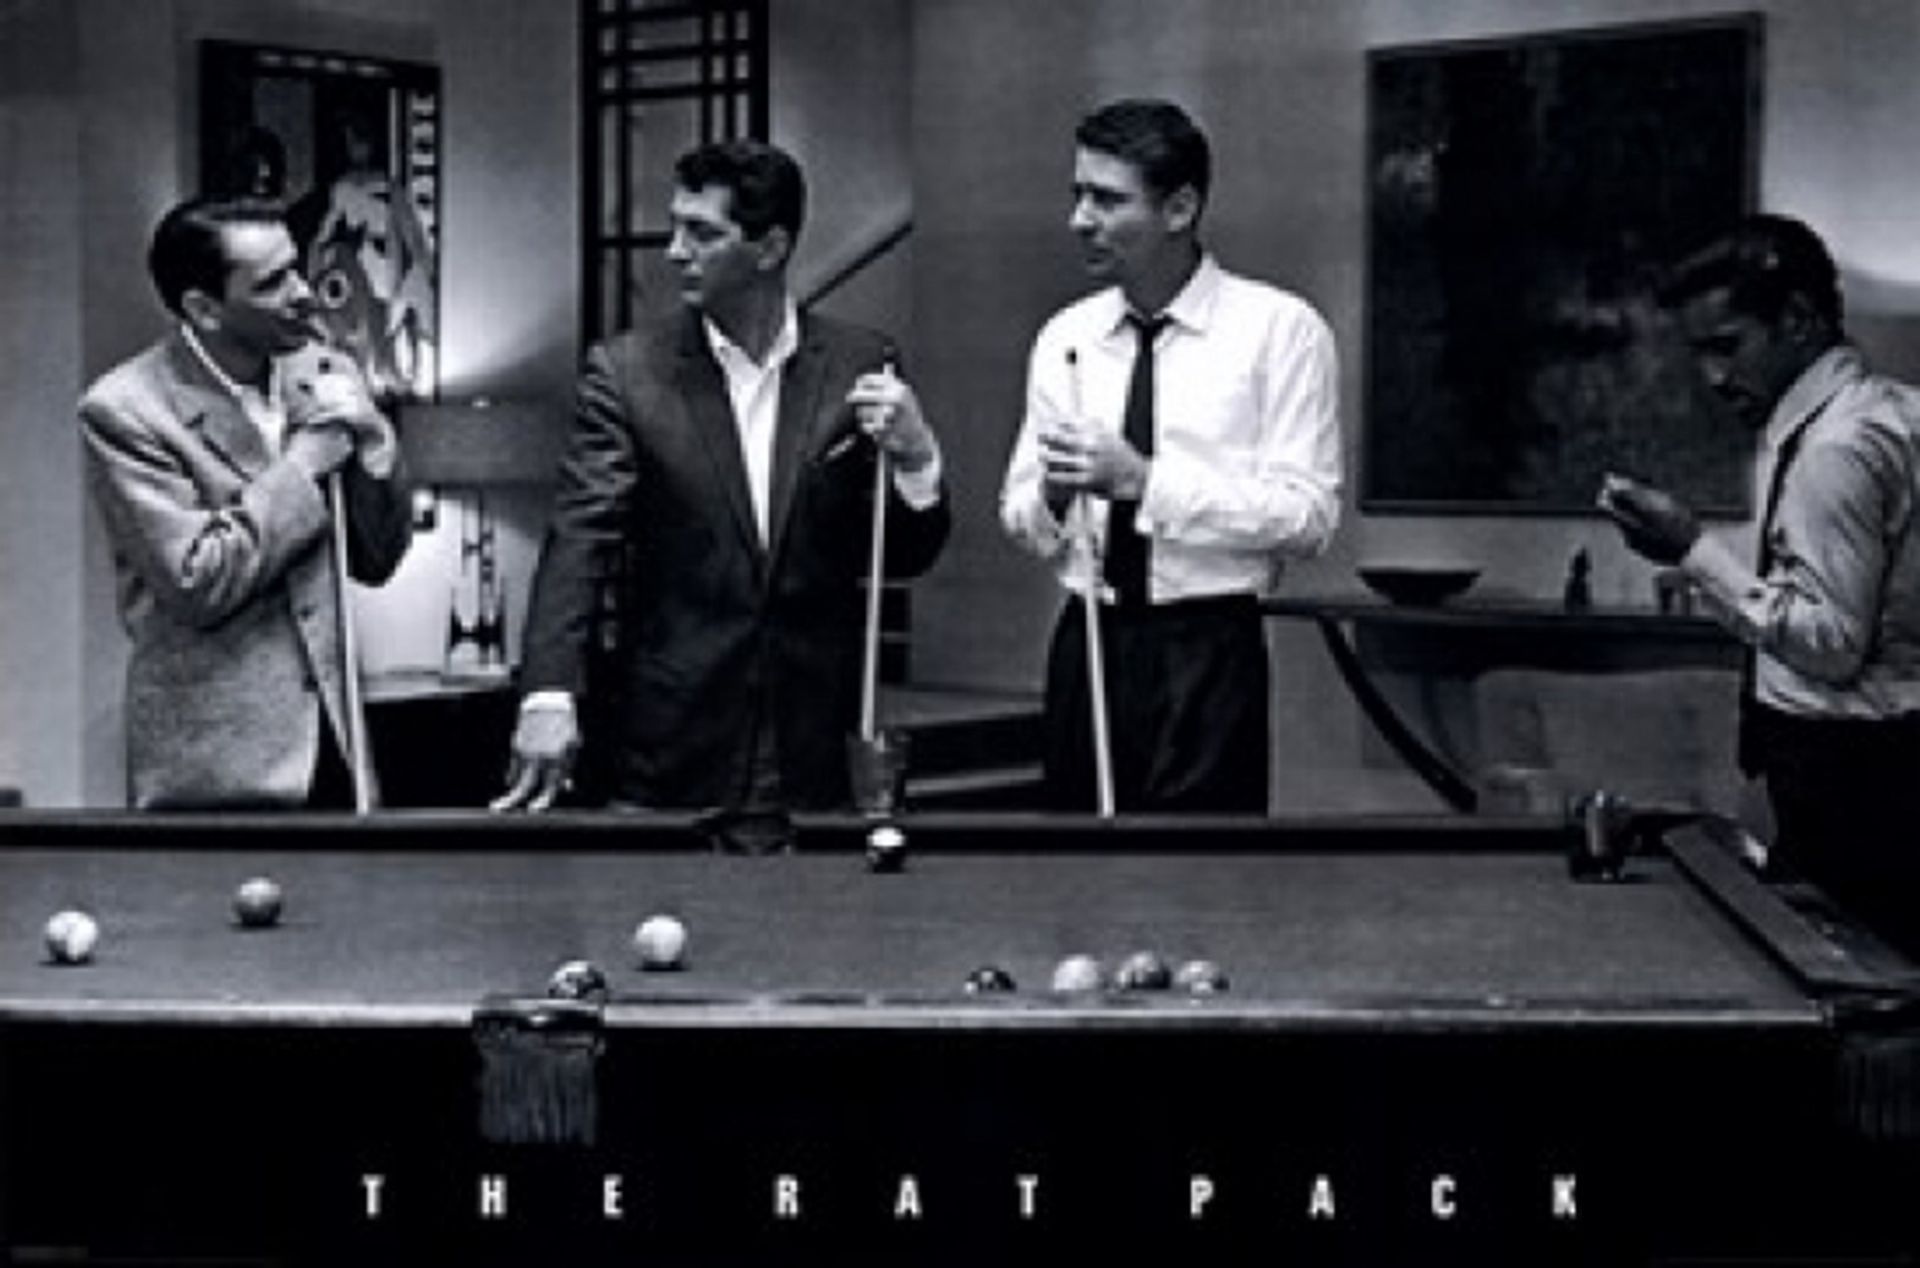 The Rat Pack "Untitled" Print